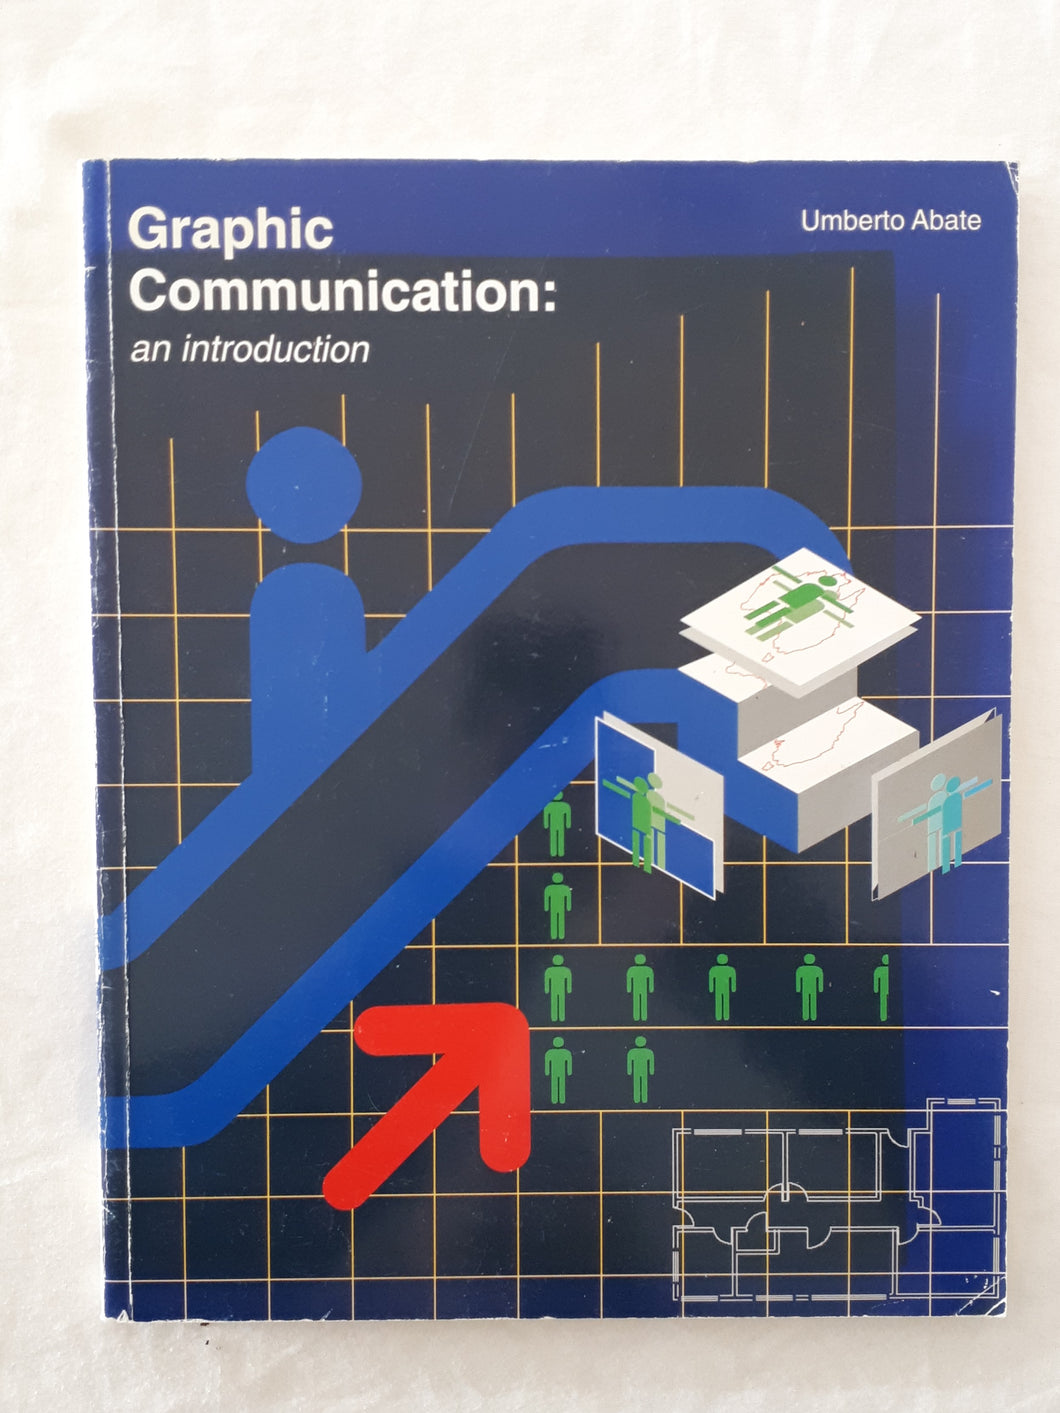 Graphic Communication: an introduction by Umberto Abate